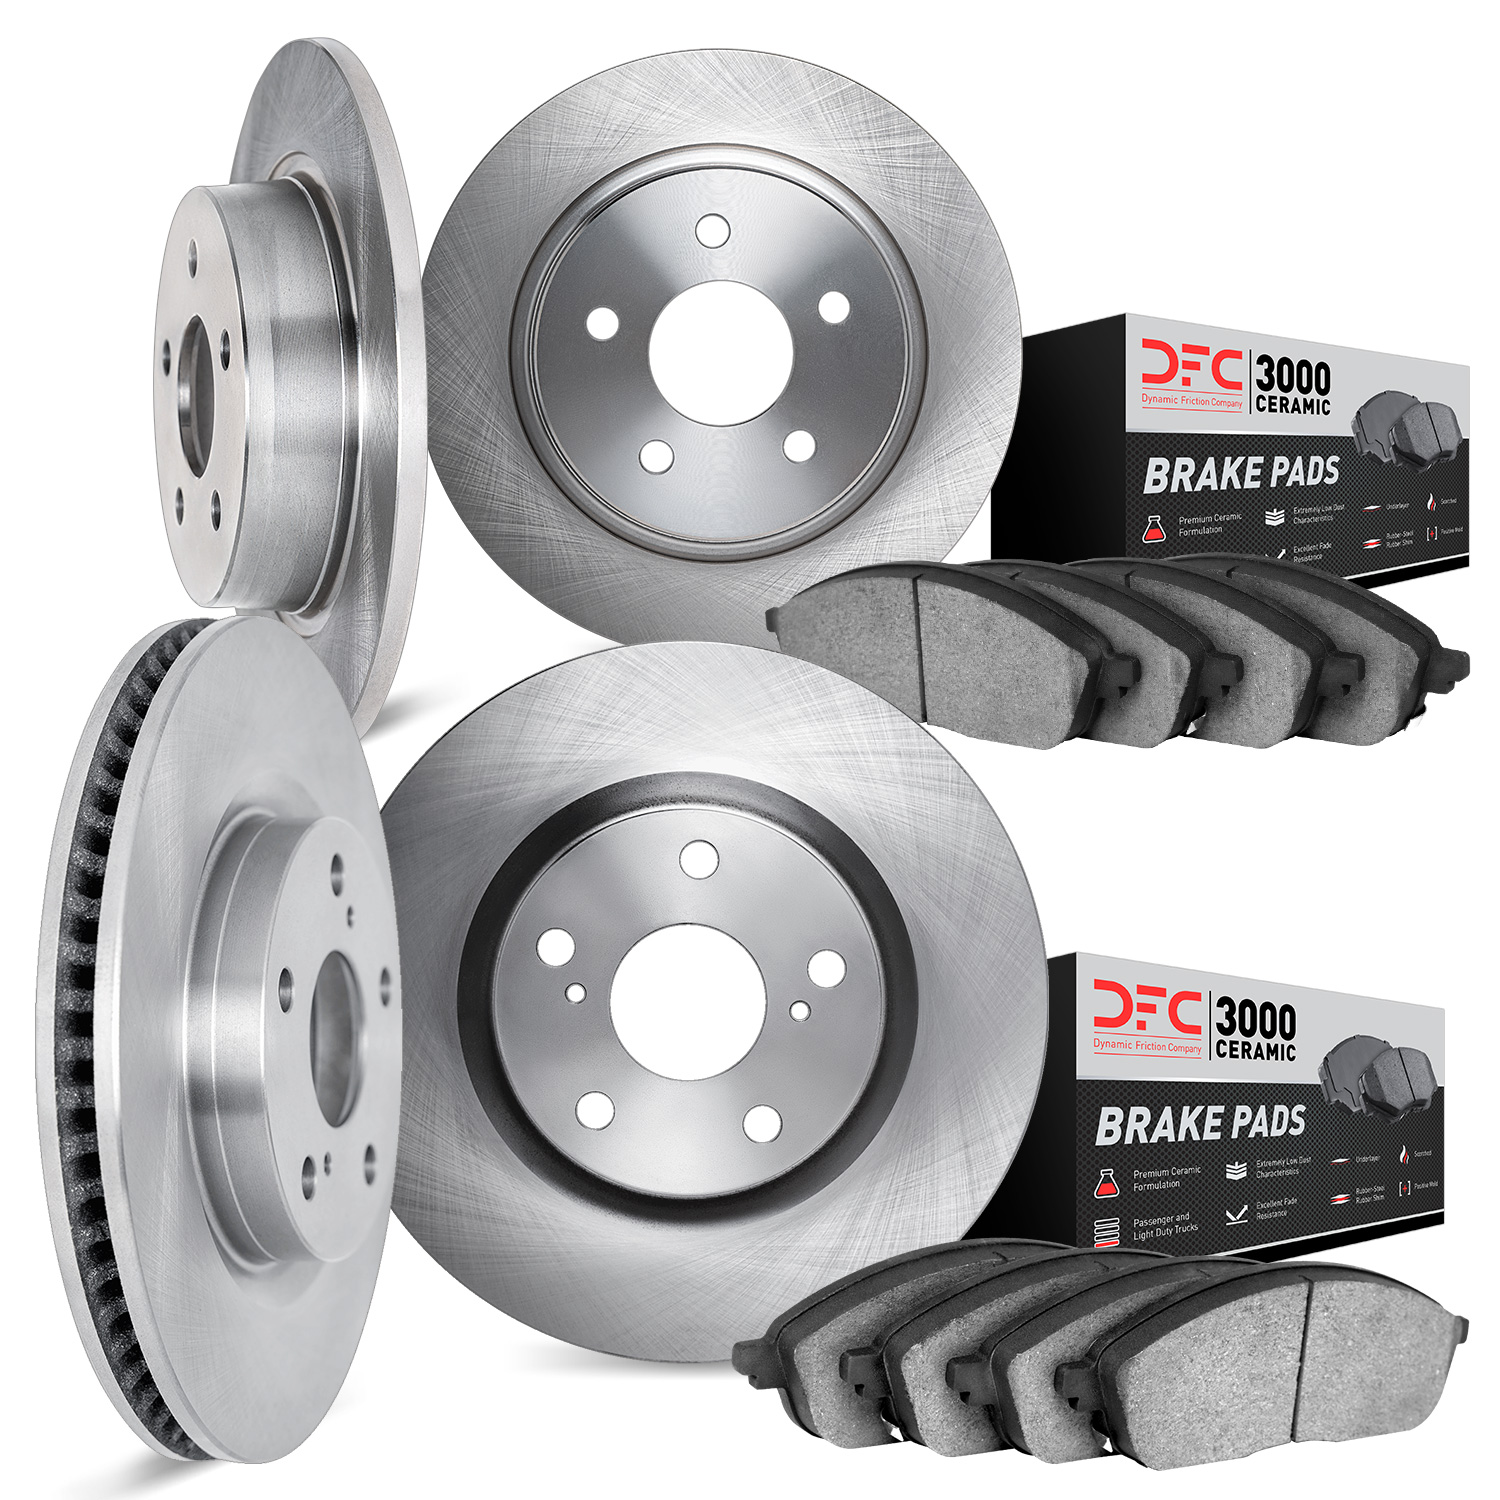 6304-59084 Brake Rotors with 3000-Series Ceramic Brake Pads Kit, Fits Select Acura/Honda, Position: Front and Rear